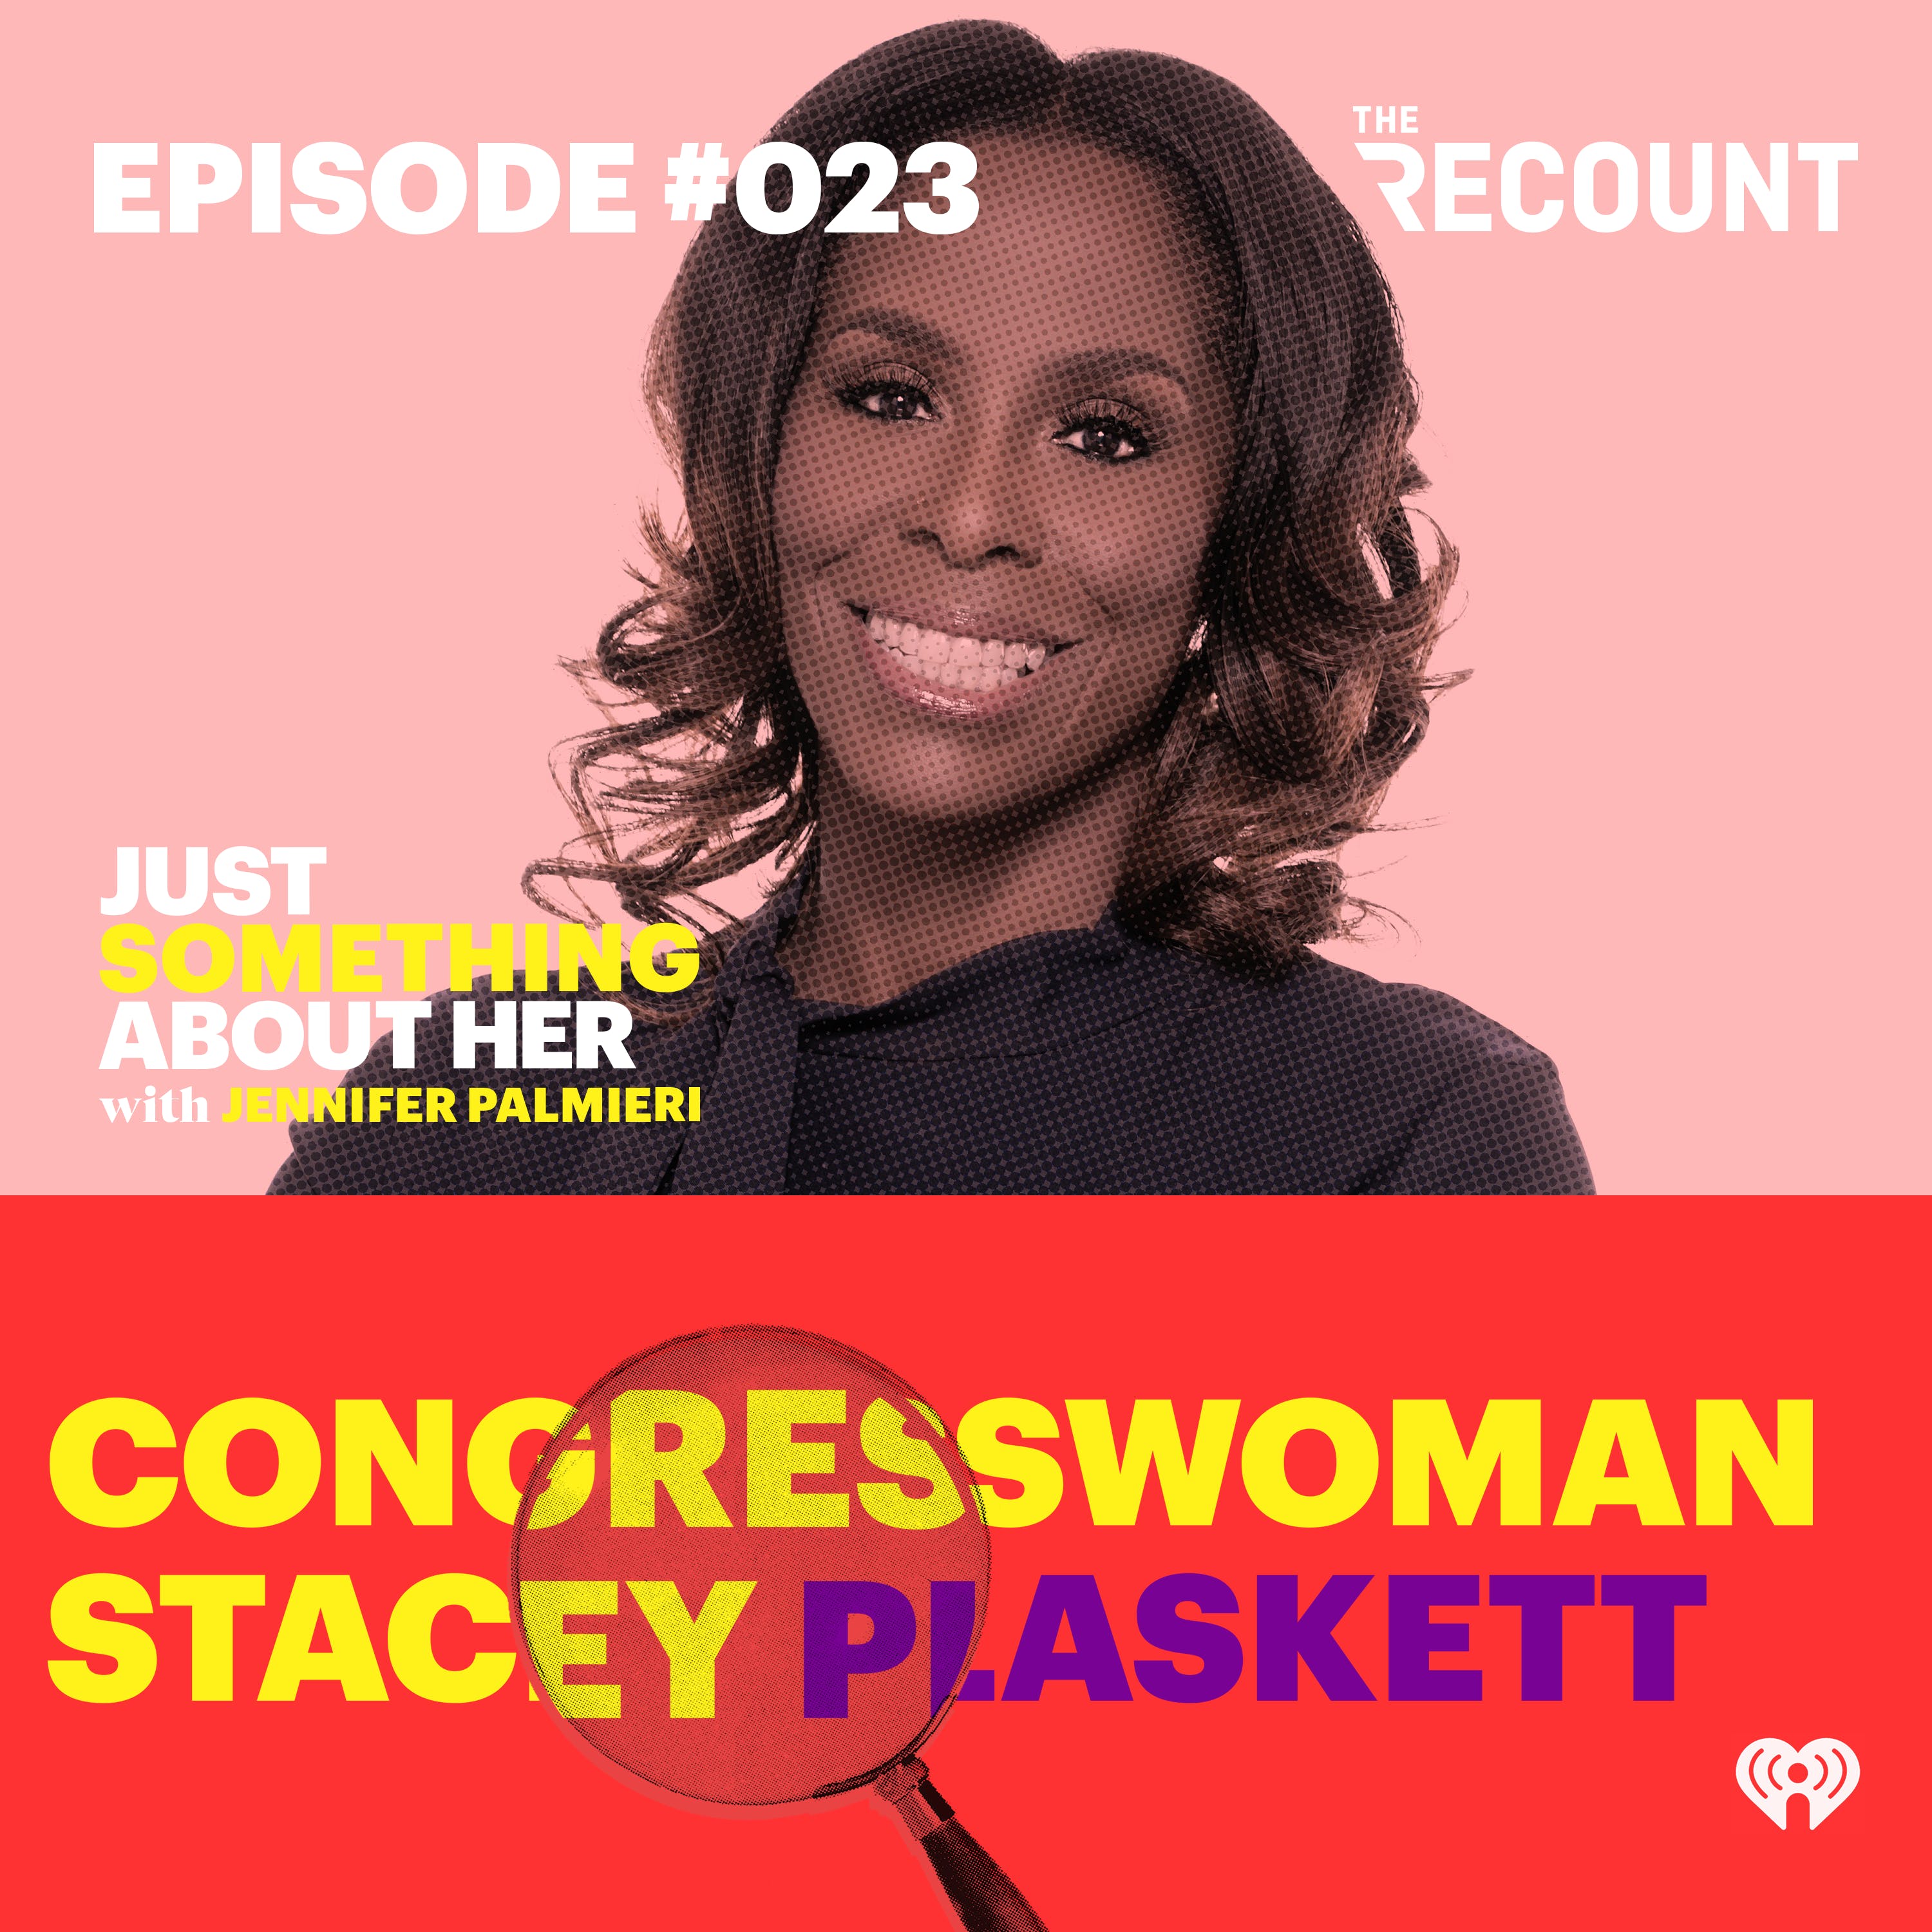 Why Americans in the Virgin Islands Deserve a Vote with Stacey Plaskett